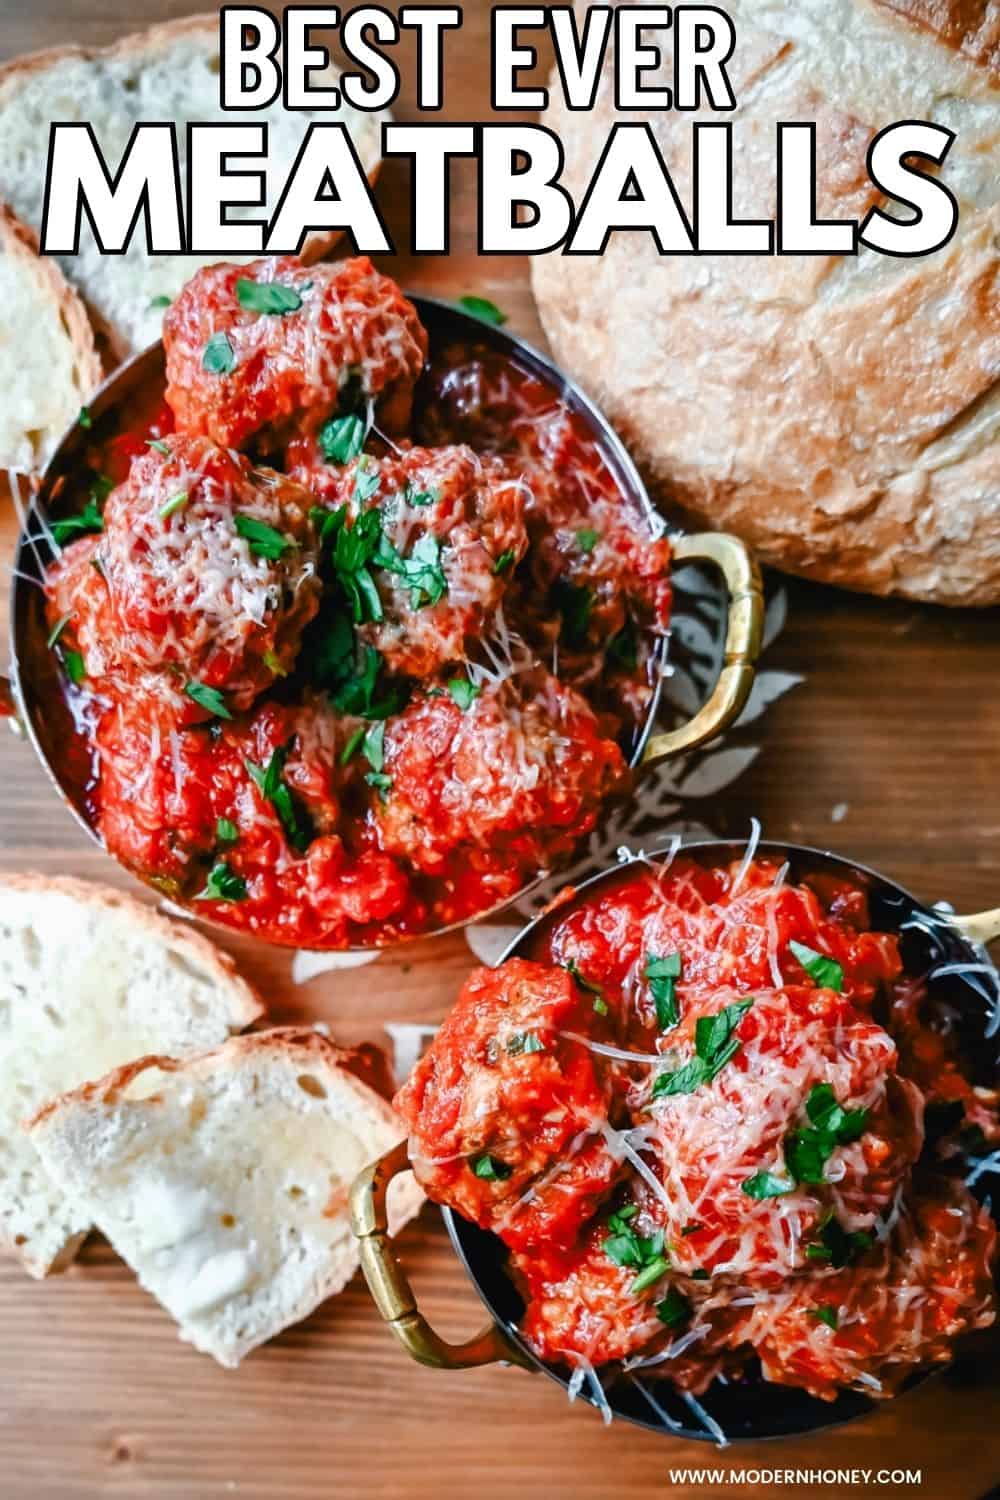 How to master the art of making easy homemade meatballs. This is the best homemade meatball recipe made with fresh ingredients! I will share all of my secrets to making the most perfect meatballs.